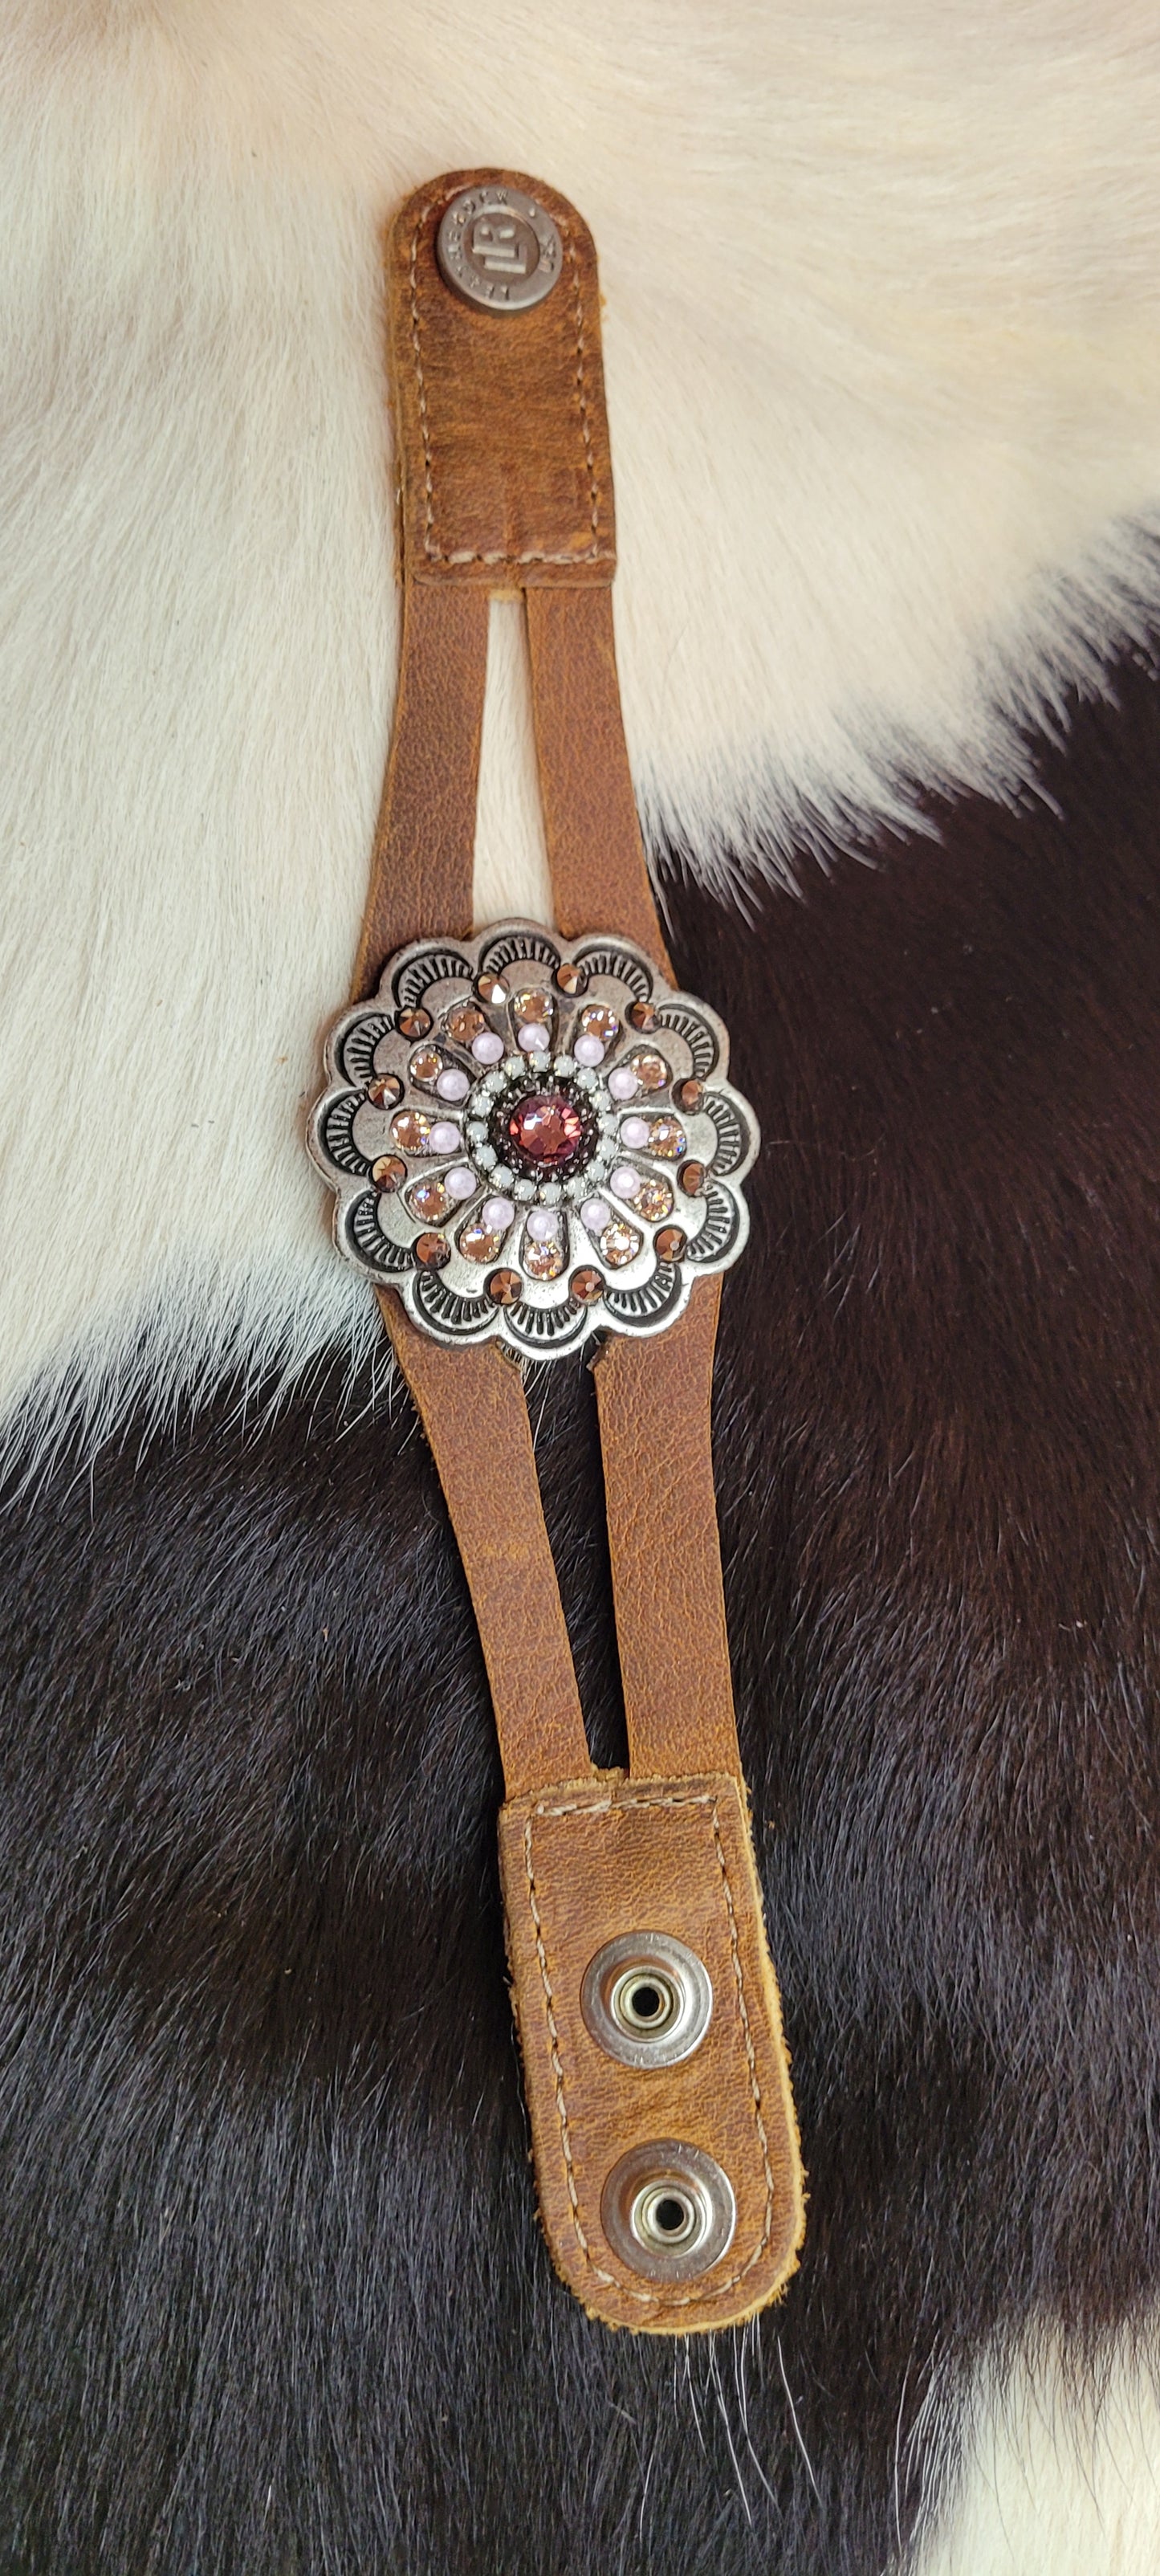 Australian crystals Genuine Leather Adjustable snap closure Color: chocolate brown Length: 8.75 inch Limited supply / one of a kind! Made in the USA